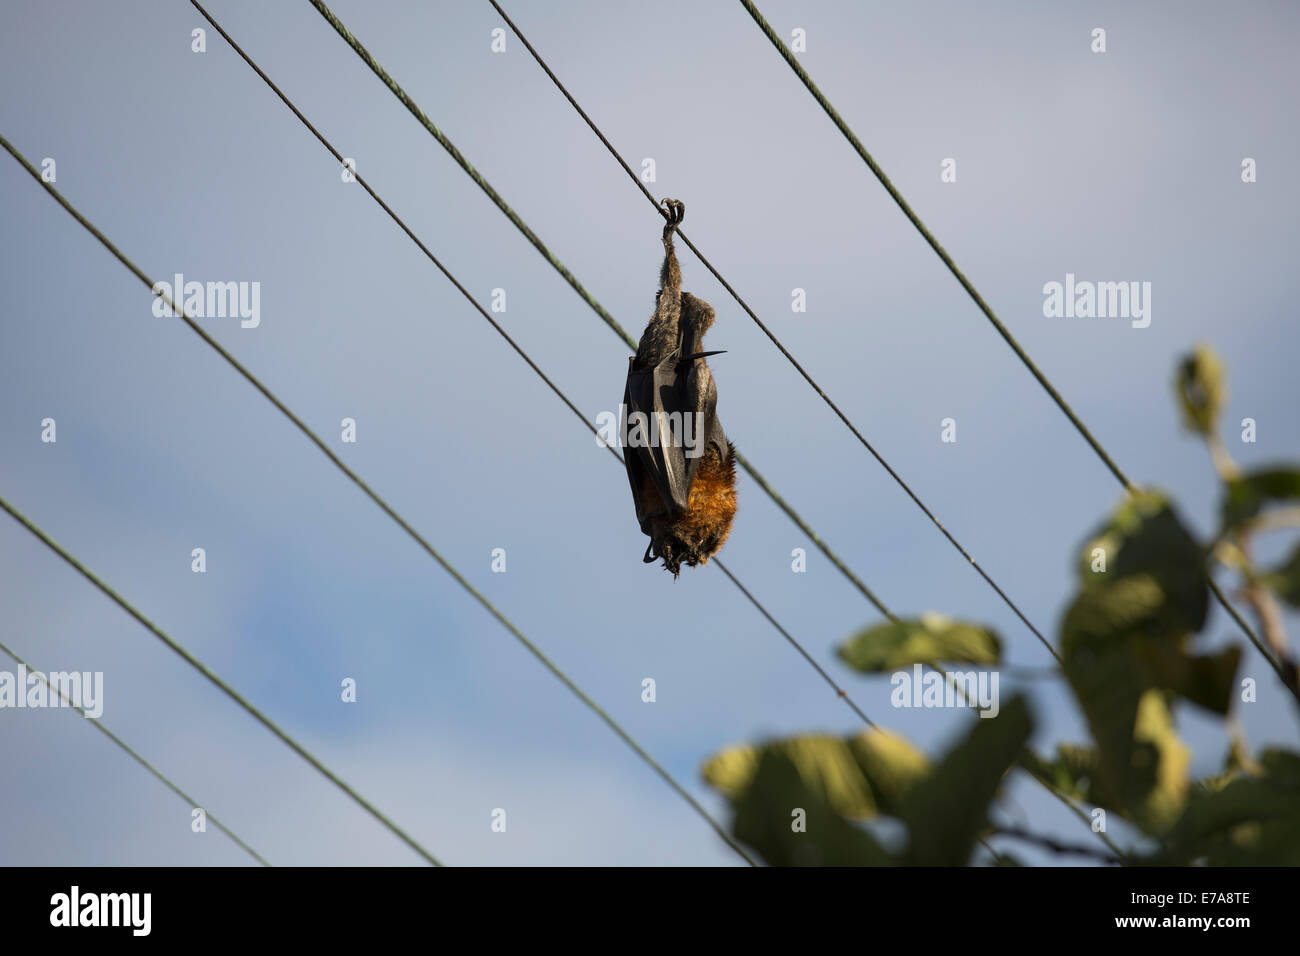 Low angle view of bat sleeping on cable against sky Stock Photo